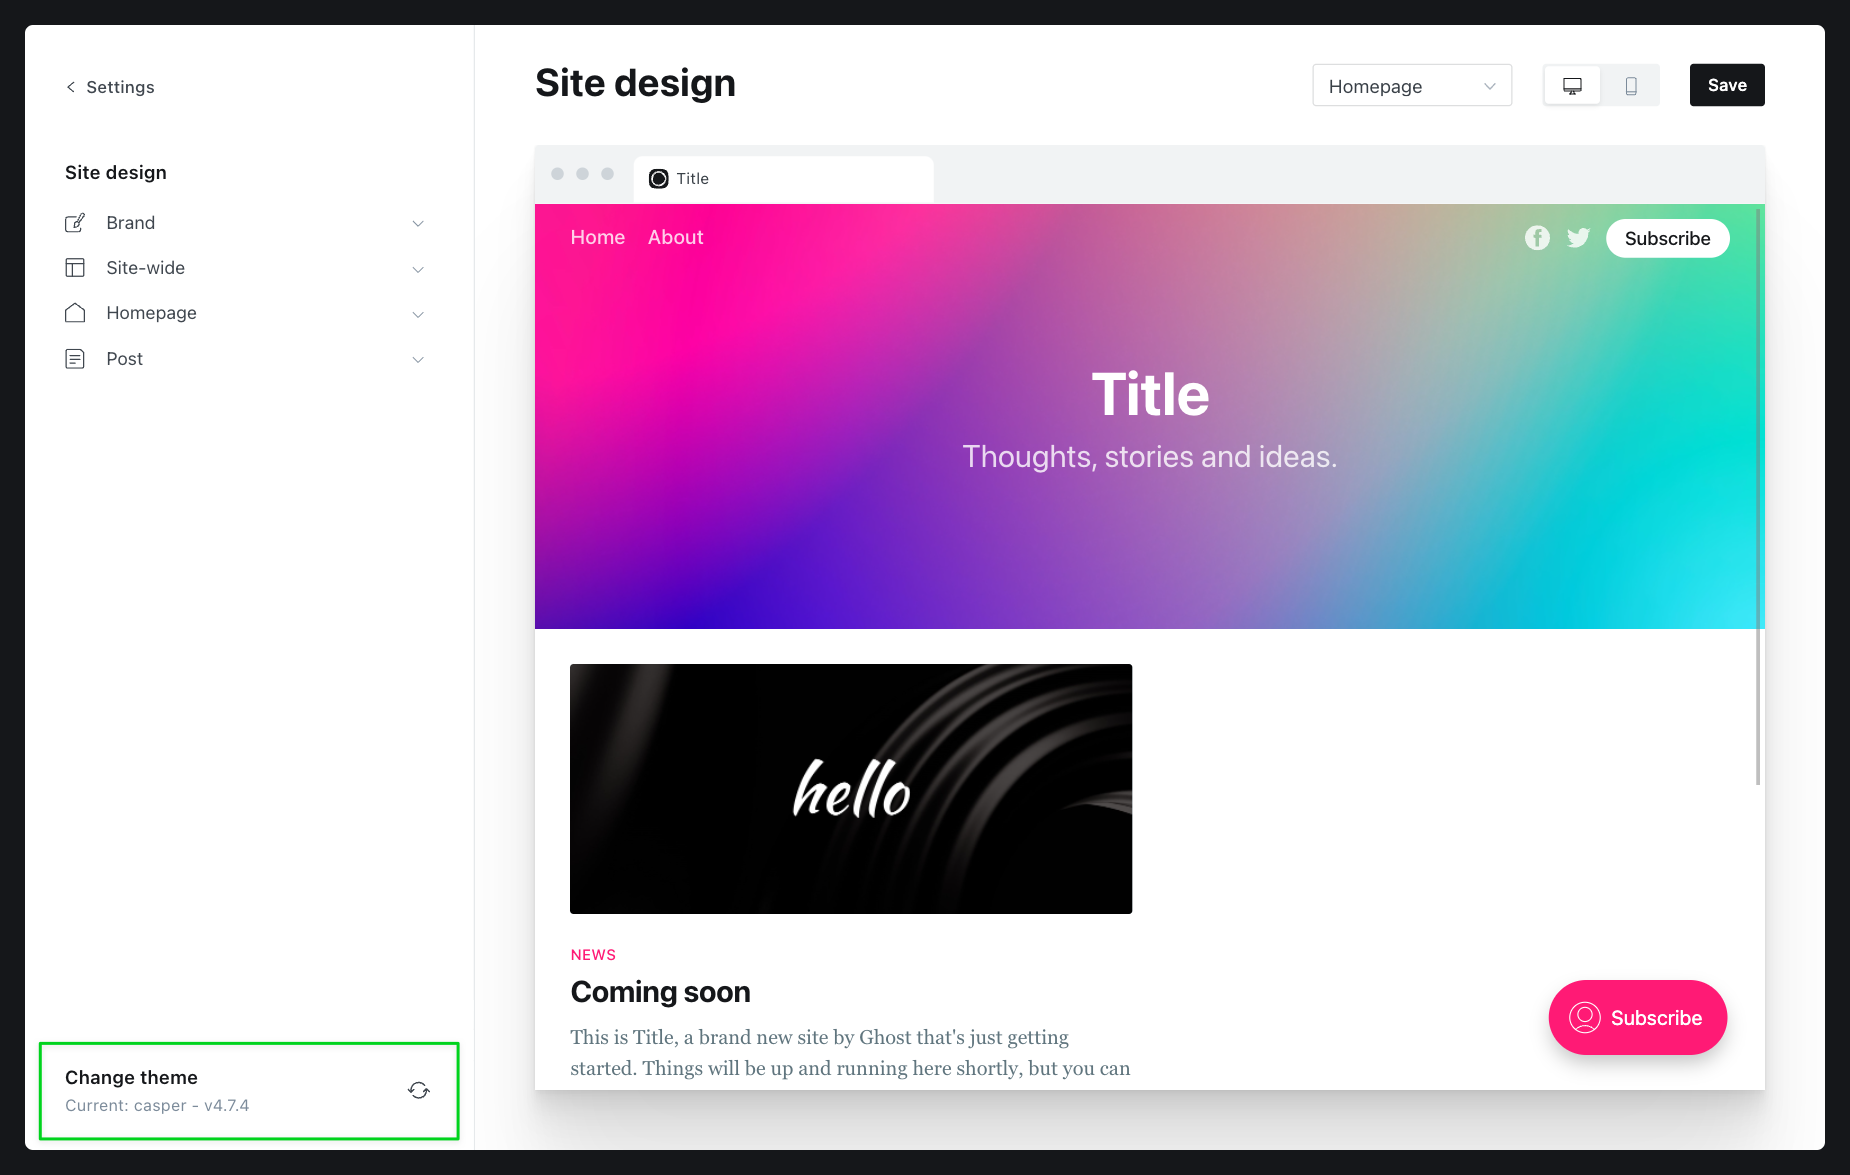 Design page with Change theme option highlighted